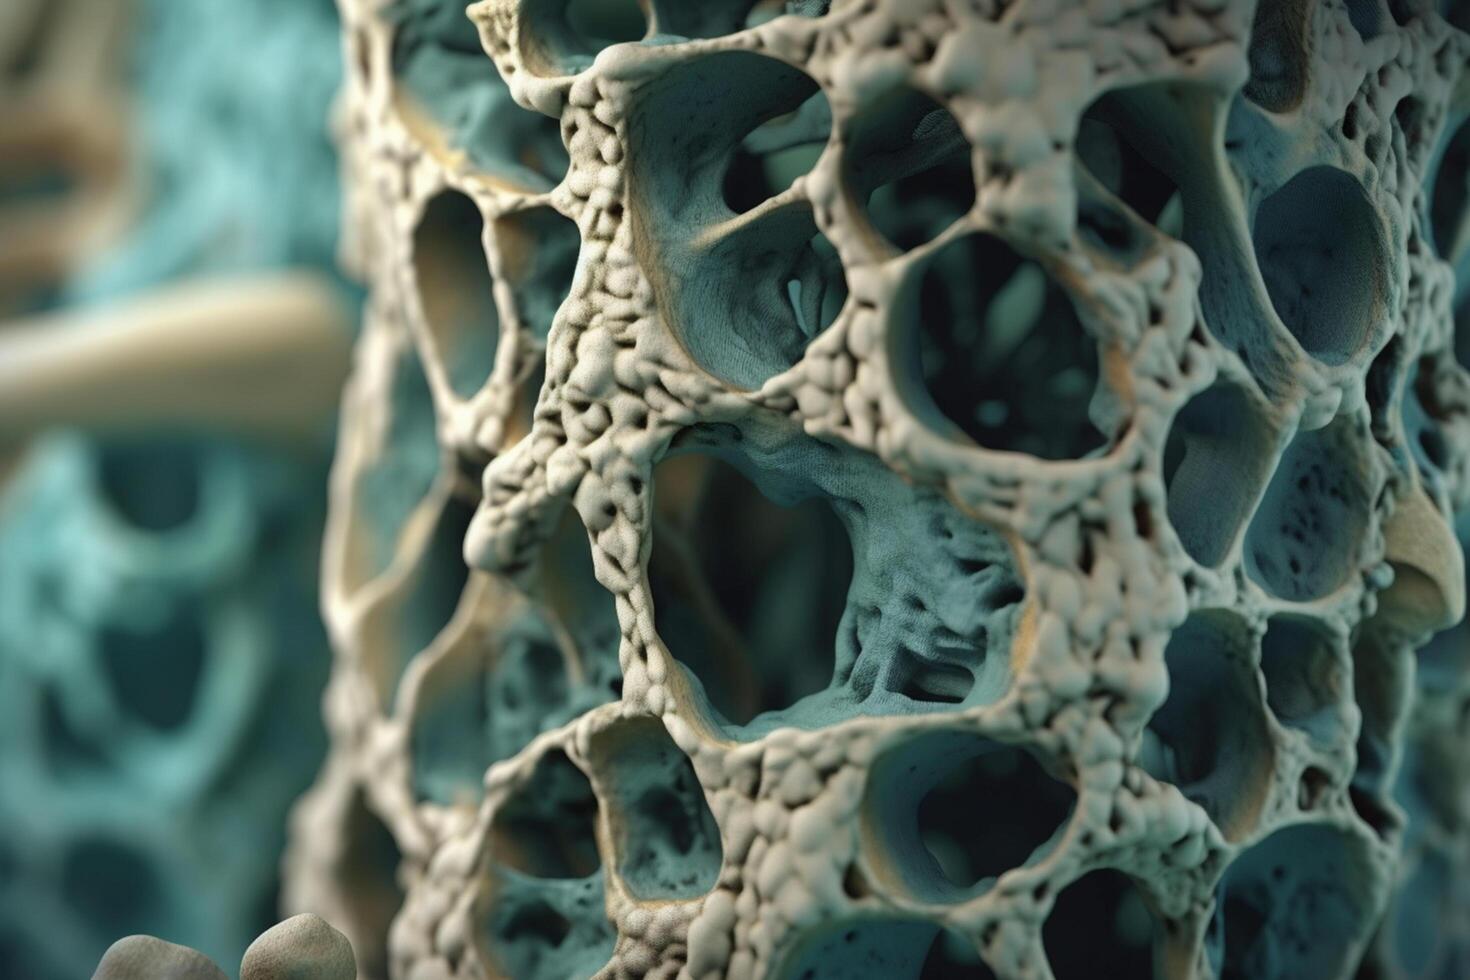 Magnified View of Bone Structure Under the Microscope photo